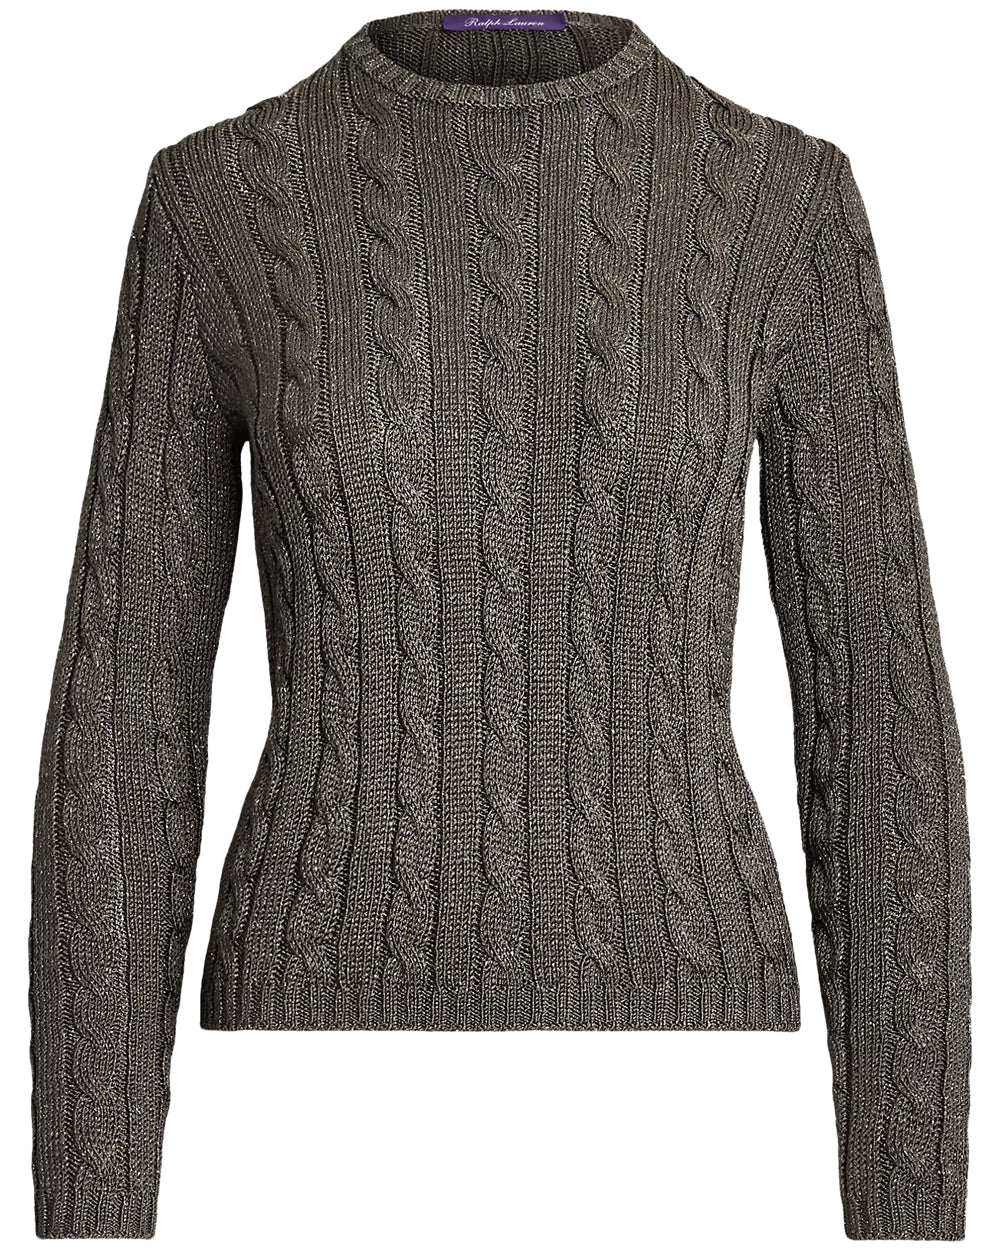 Asteroid Embellished Cable Knit Pullover